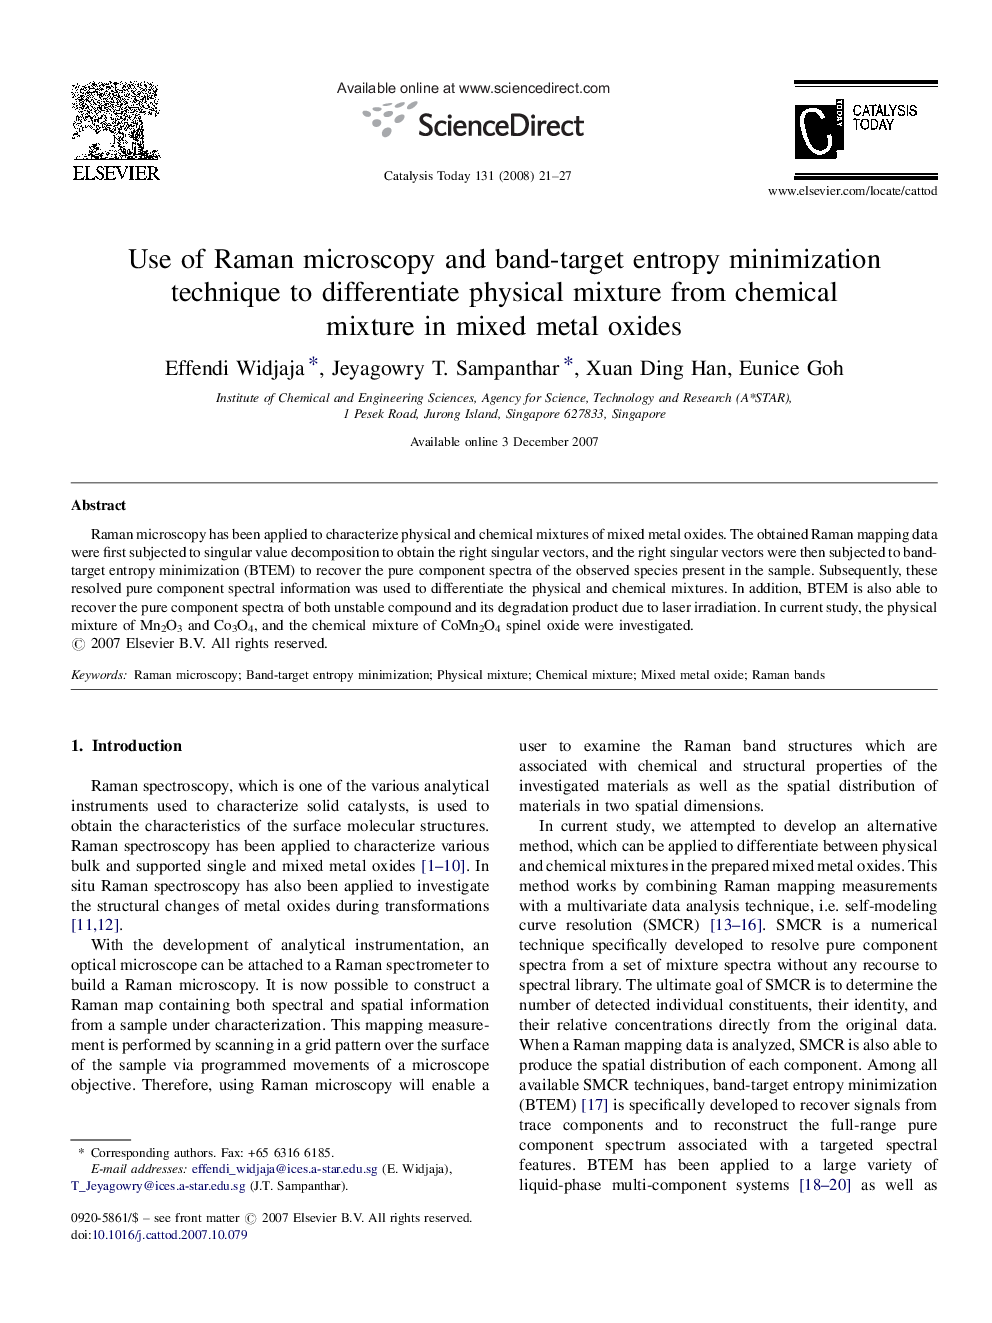 Use of Raman microscopy and band-target entropy minimization technique to differentiate physical mixture from chemical mixture in mixed metal oxides